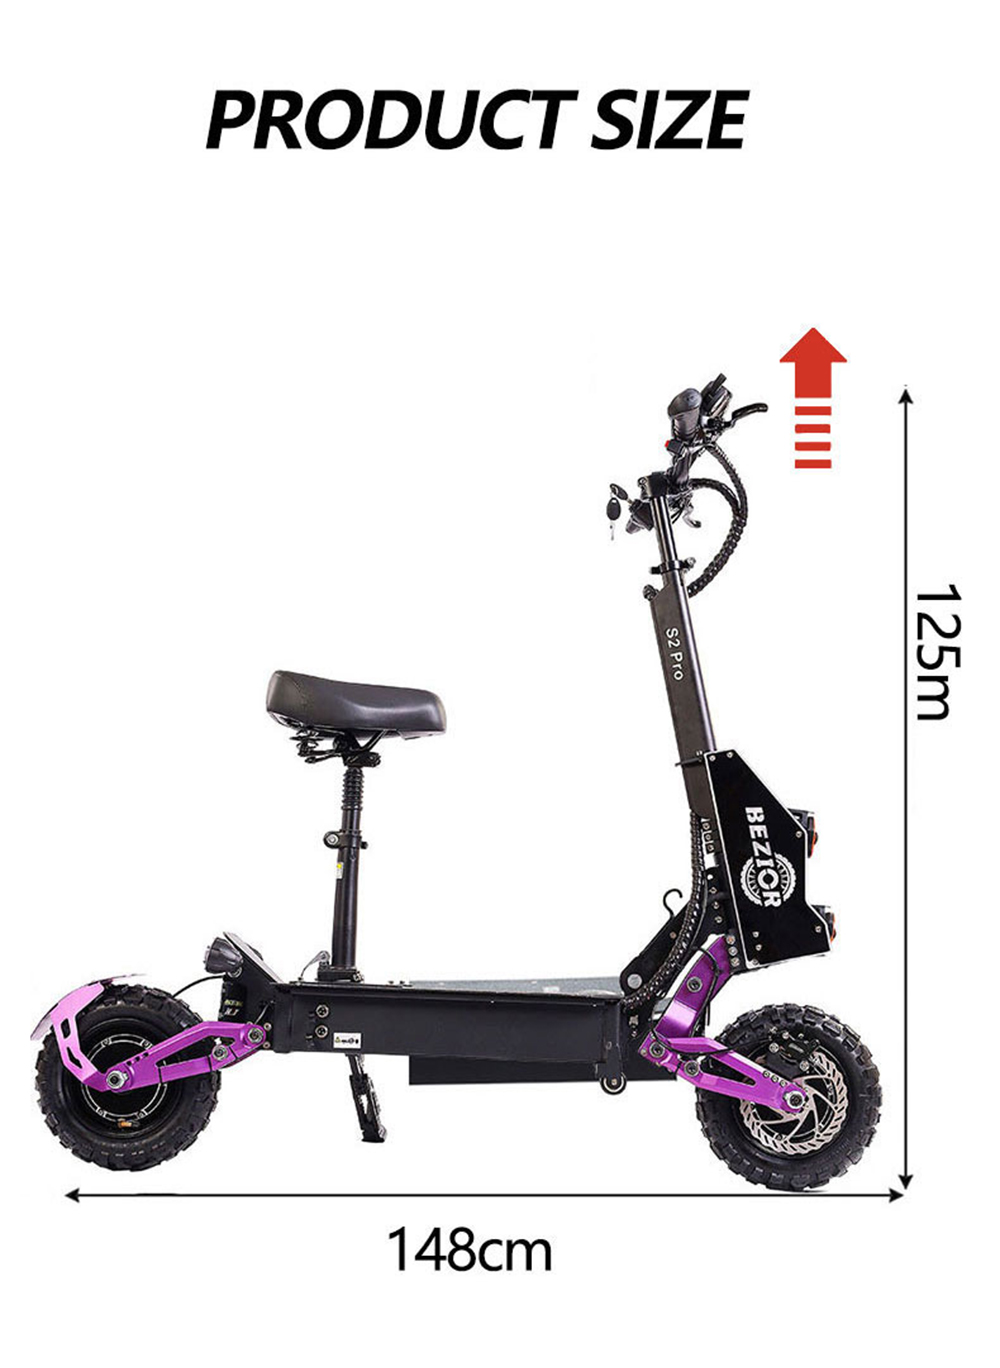 BEZIOR S2 PRO Electric Off-Road Scooter 11'' Wheel 1200W*2 Dual Motor 23Ah Battery 65km/h Max Speed 120kg Load